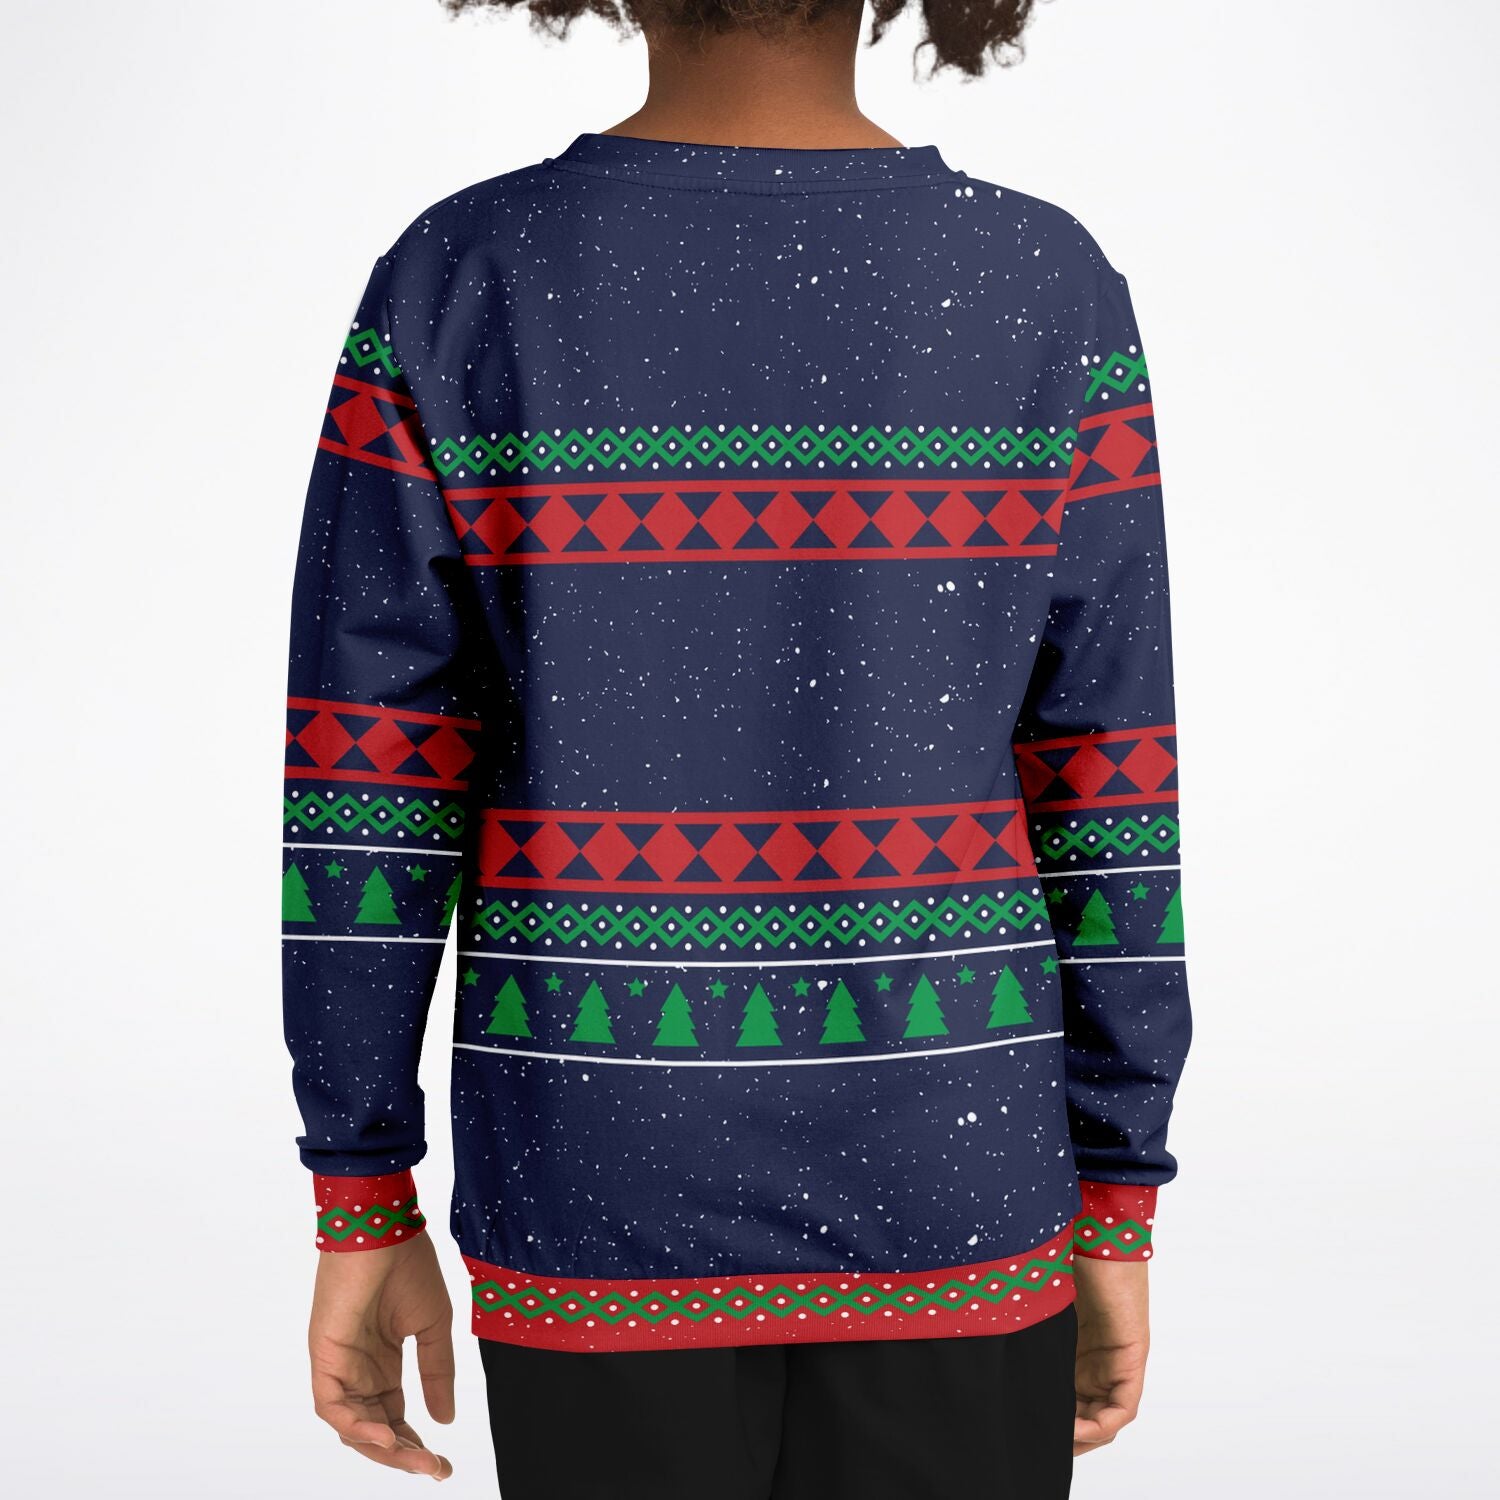 Ugly Holiday Sweater-What the Elf-Kids/Youth